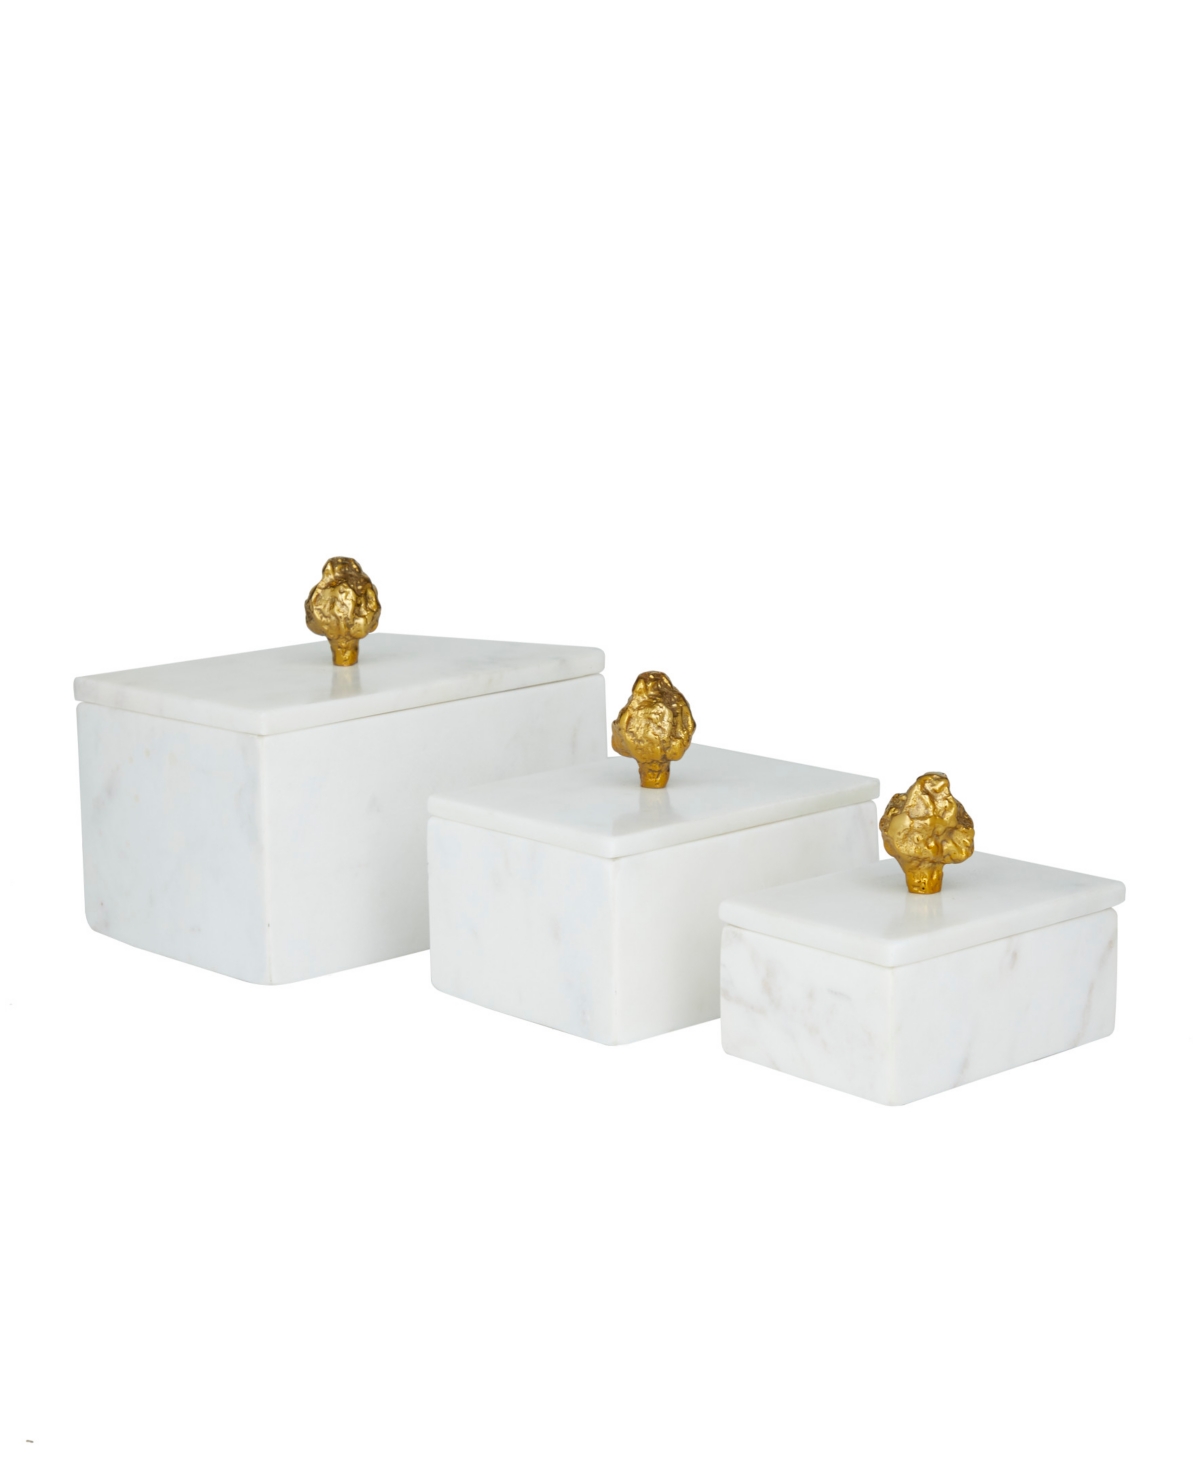 Rosemary Lane Real Marble Box With Gold-tone Finial Set Of 3 In White